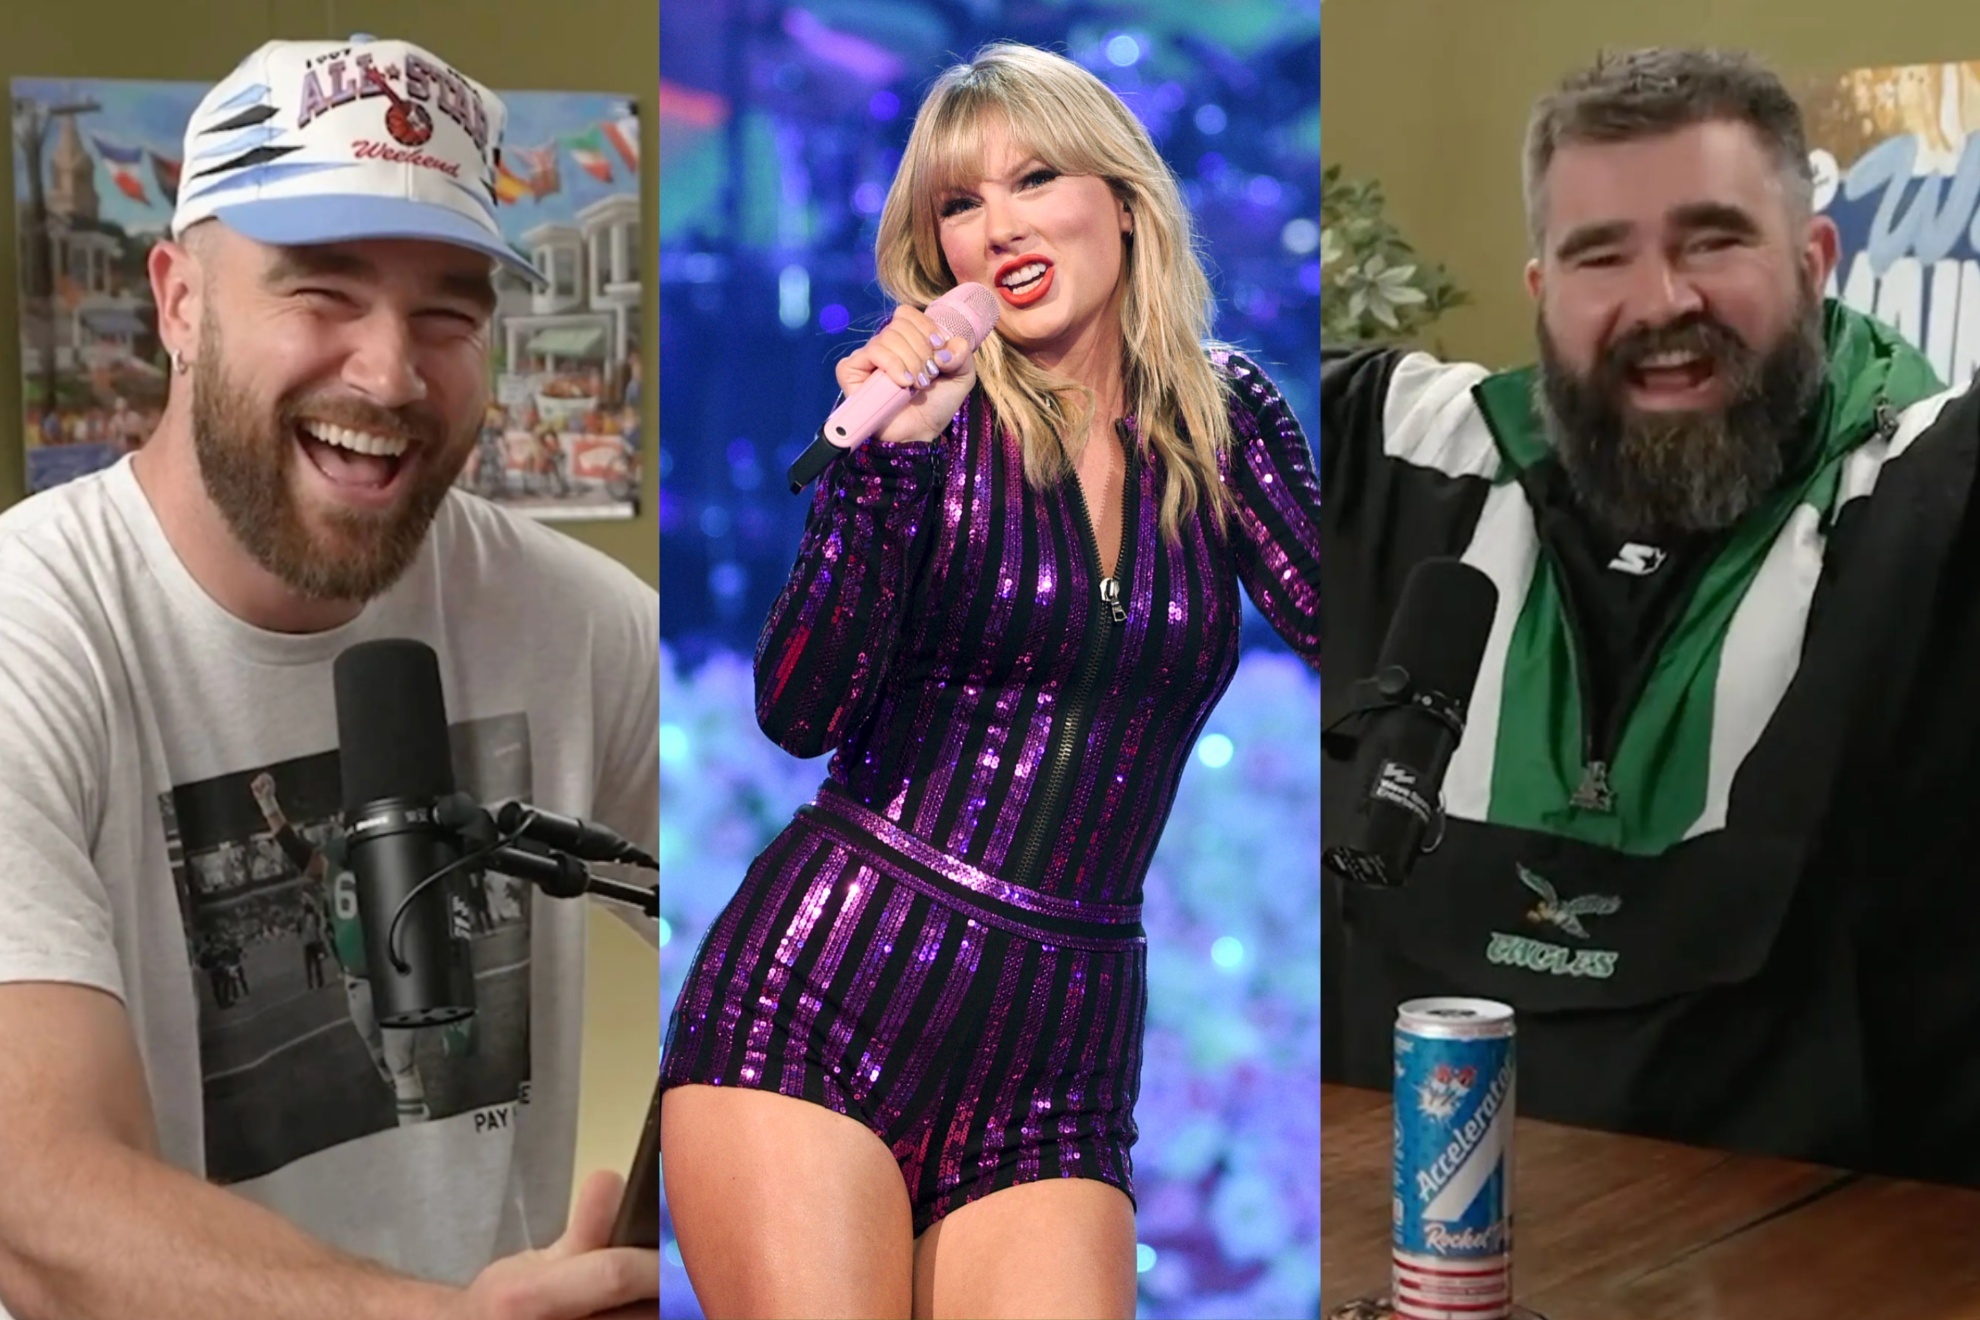 Mashup image of Kelce brothers and Taylor Swift